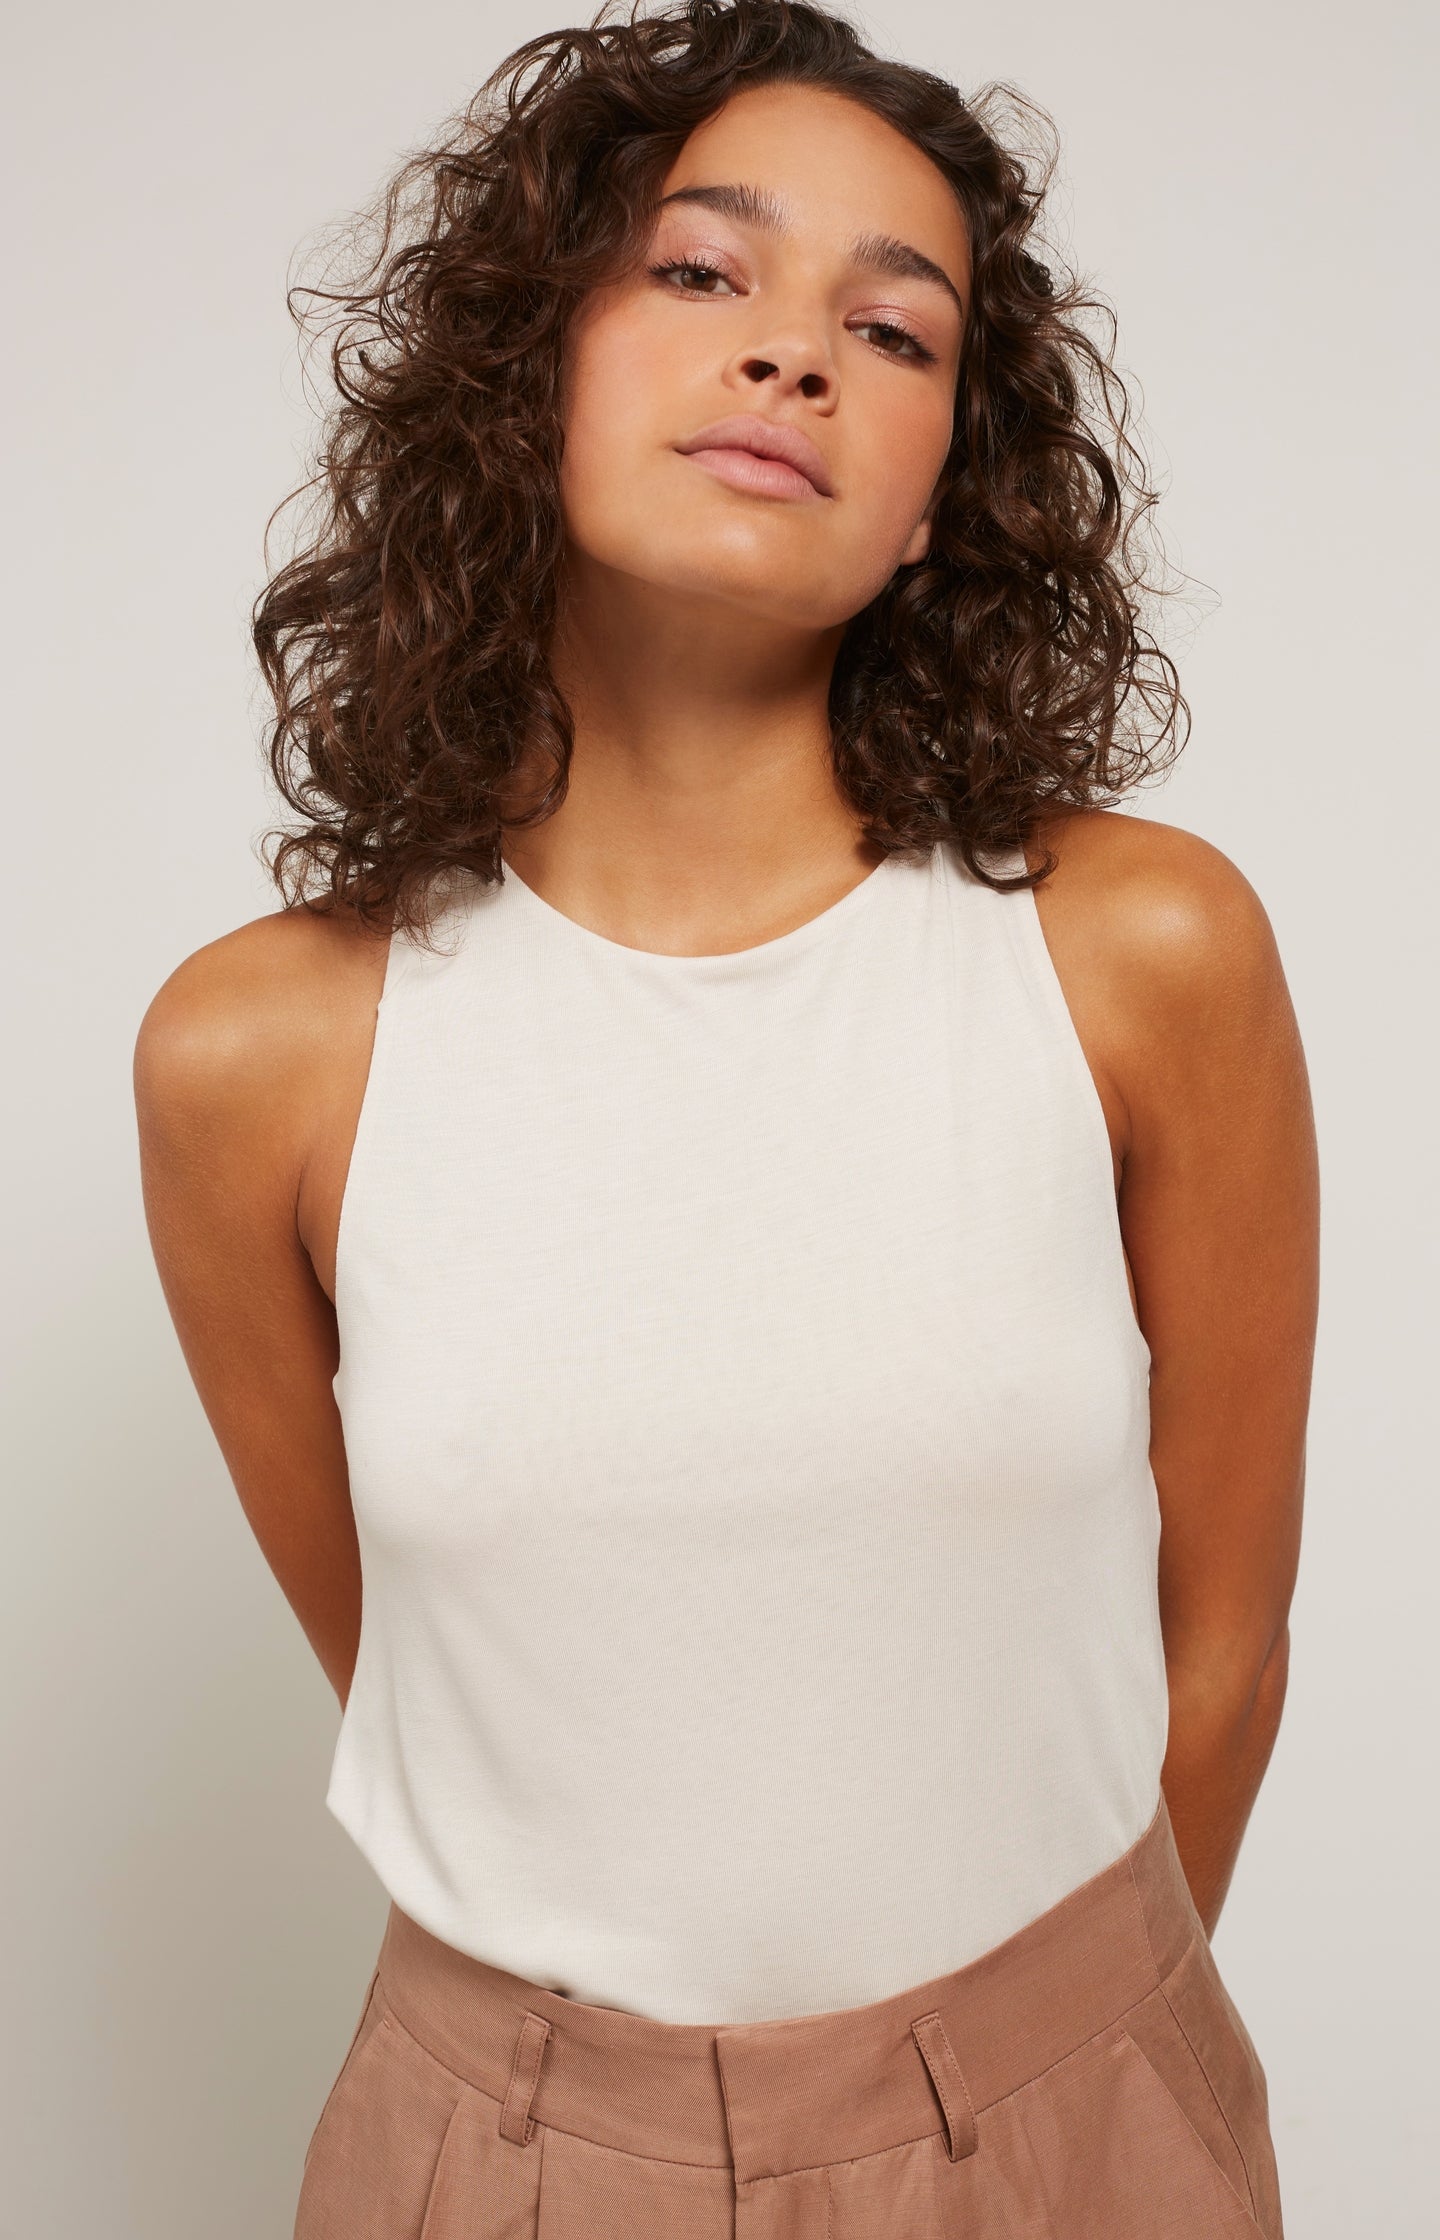 Singlet with round neck and crossed straps on back - Type: lookbook